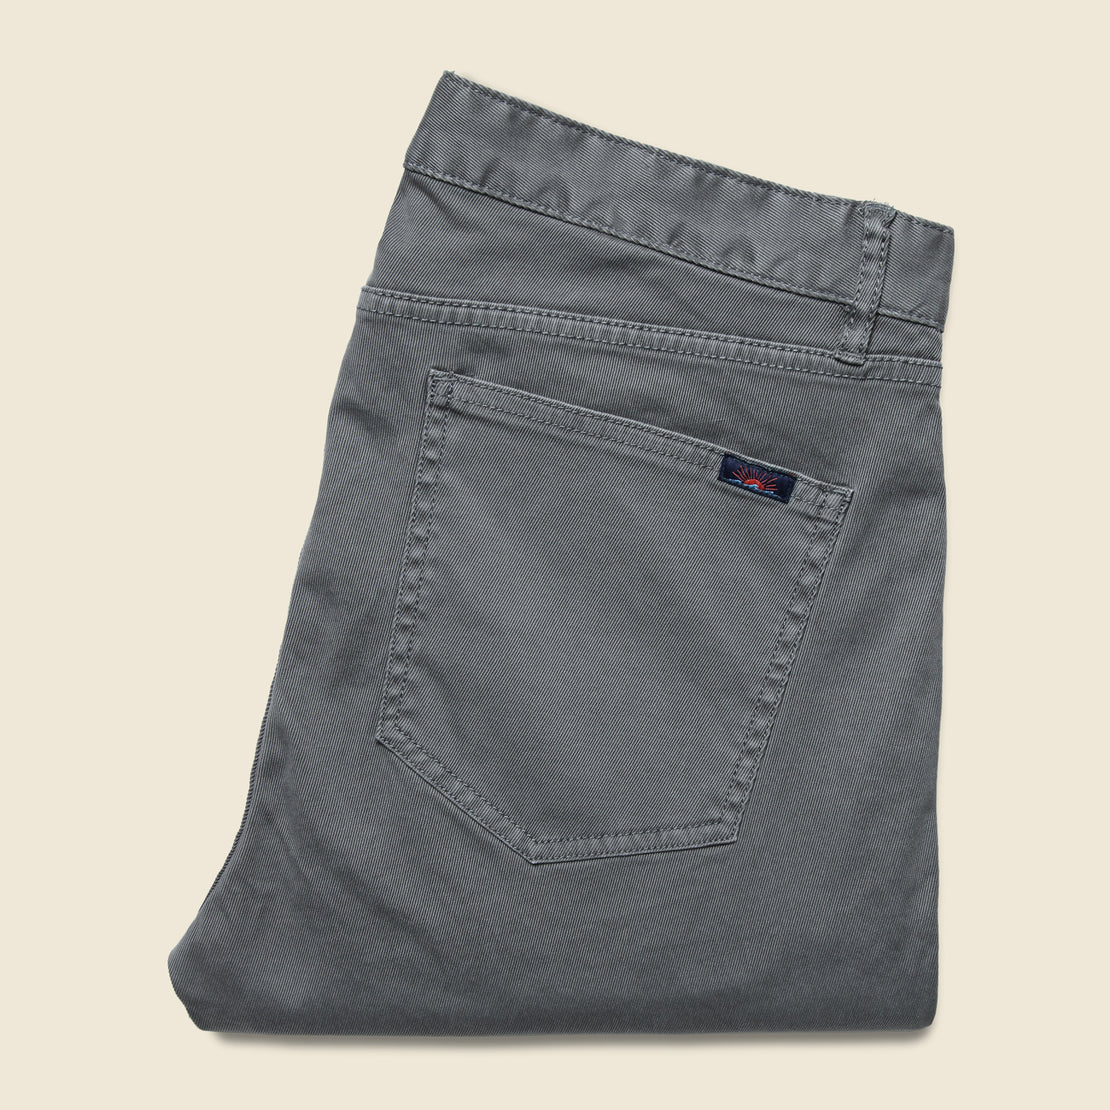 Comfort Twill Jean - Rugged Grey - Faherty - STAG Provisions - Pants - Twill